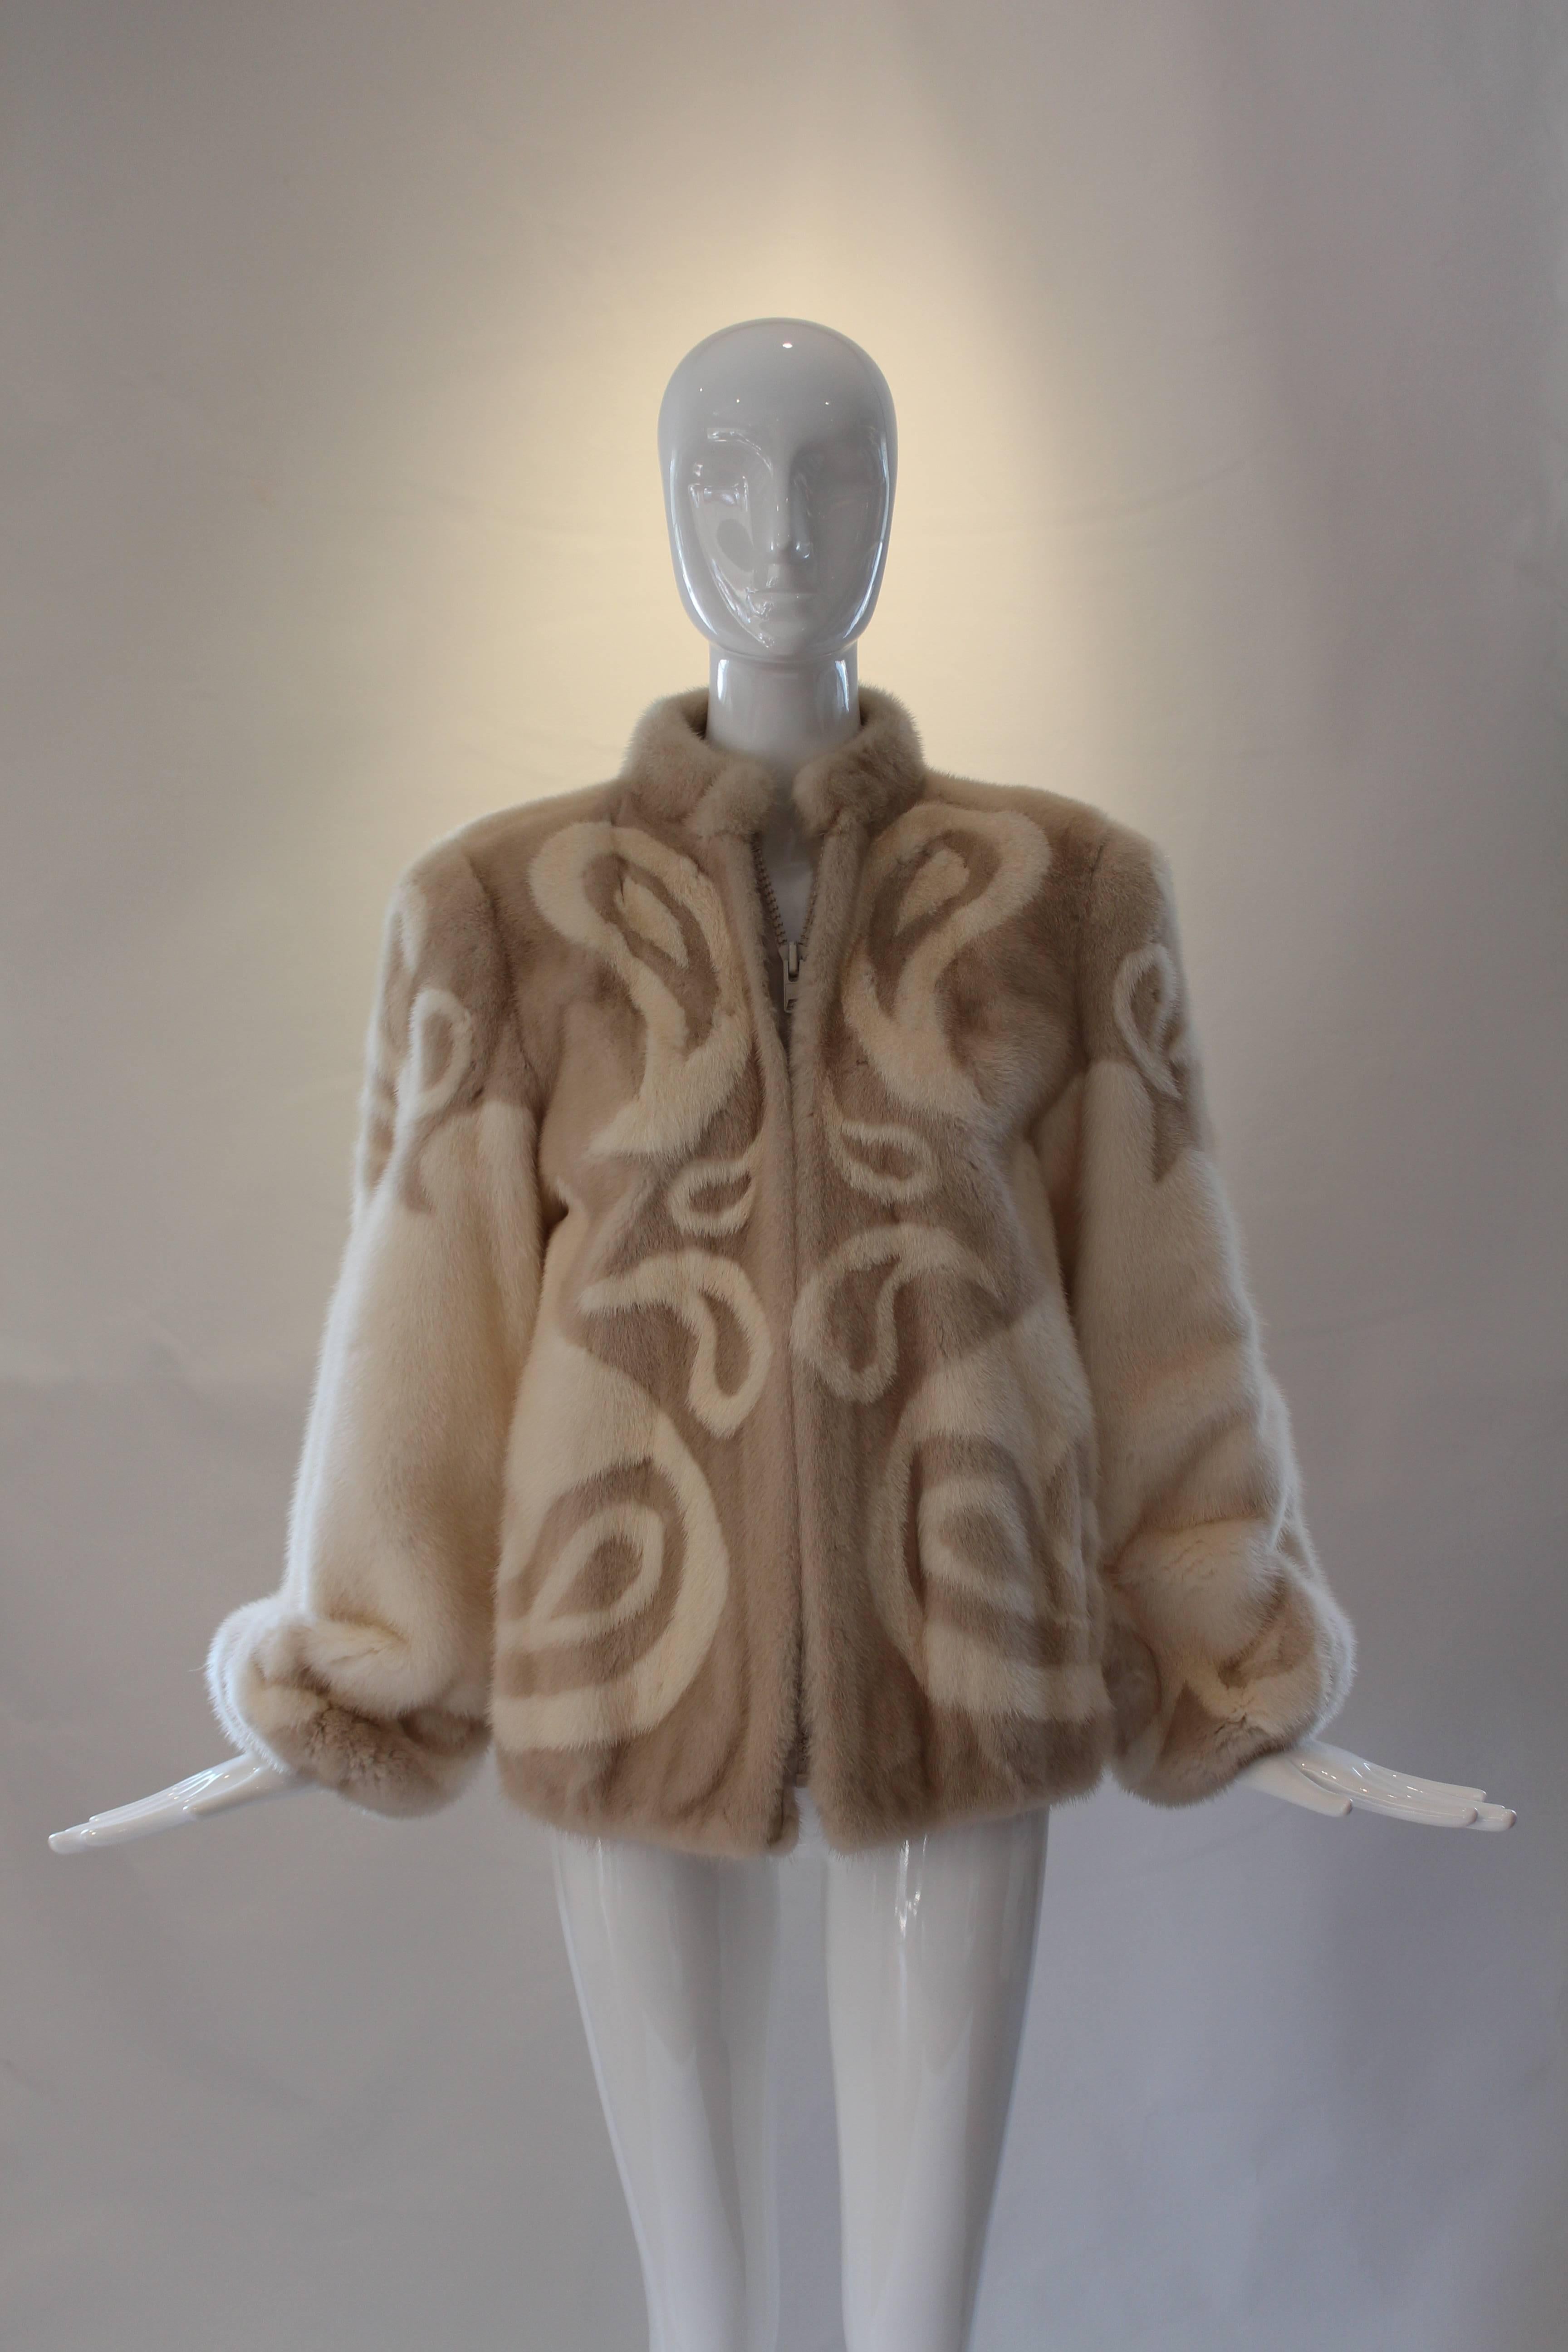 This amazing Adolfo zip front jacket is fashioned from two shades of mink fur forming a paisley print.  Full sleeves and elastic jacket bottom provide lots of shape.  The front zipper is both sturdy and substantial - true Adolfo quality.